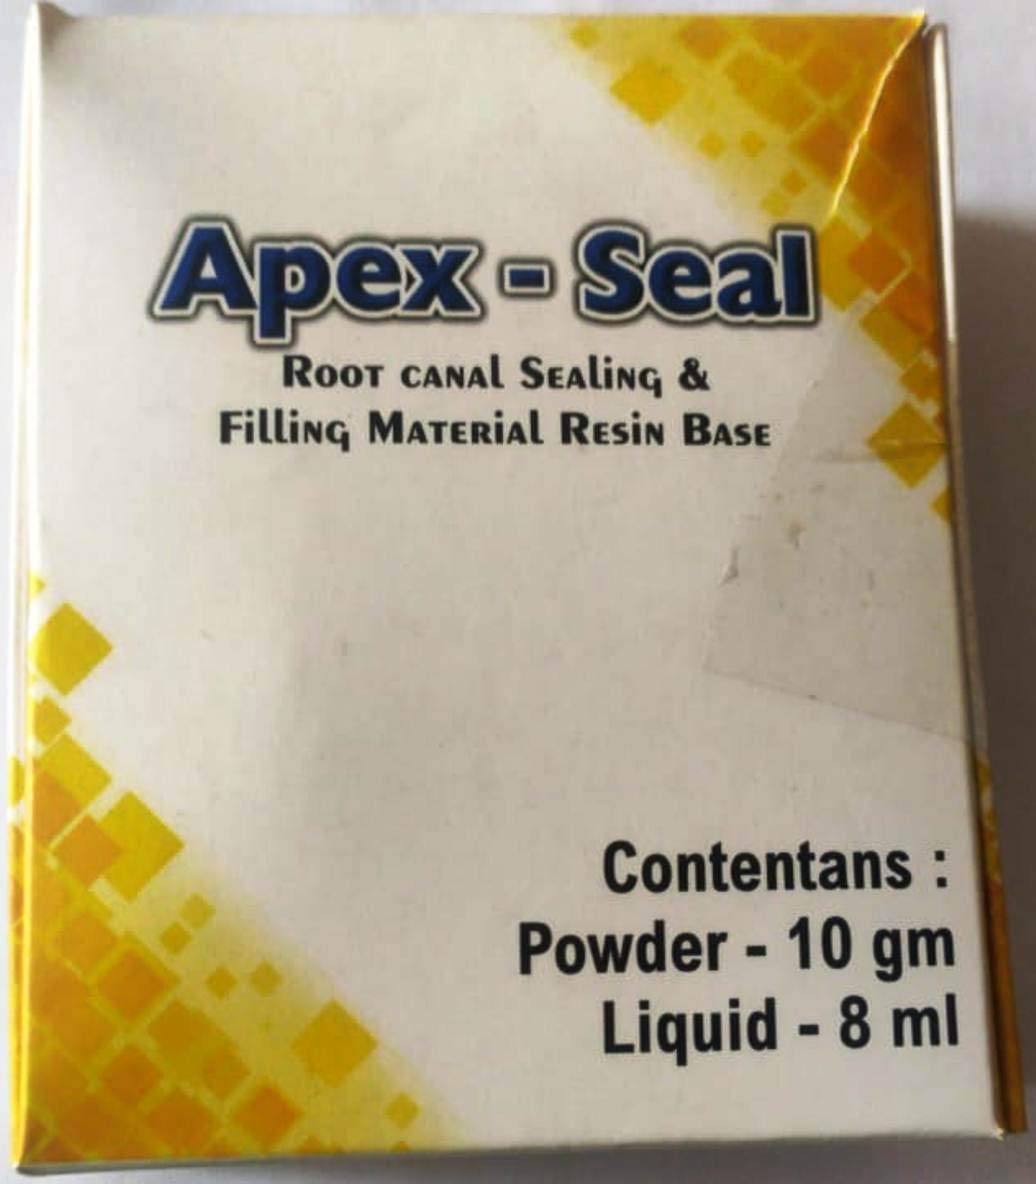 Apex Seal Root Canal Sealing And Filling Material Resin Base